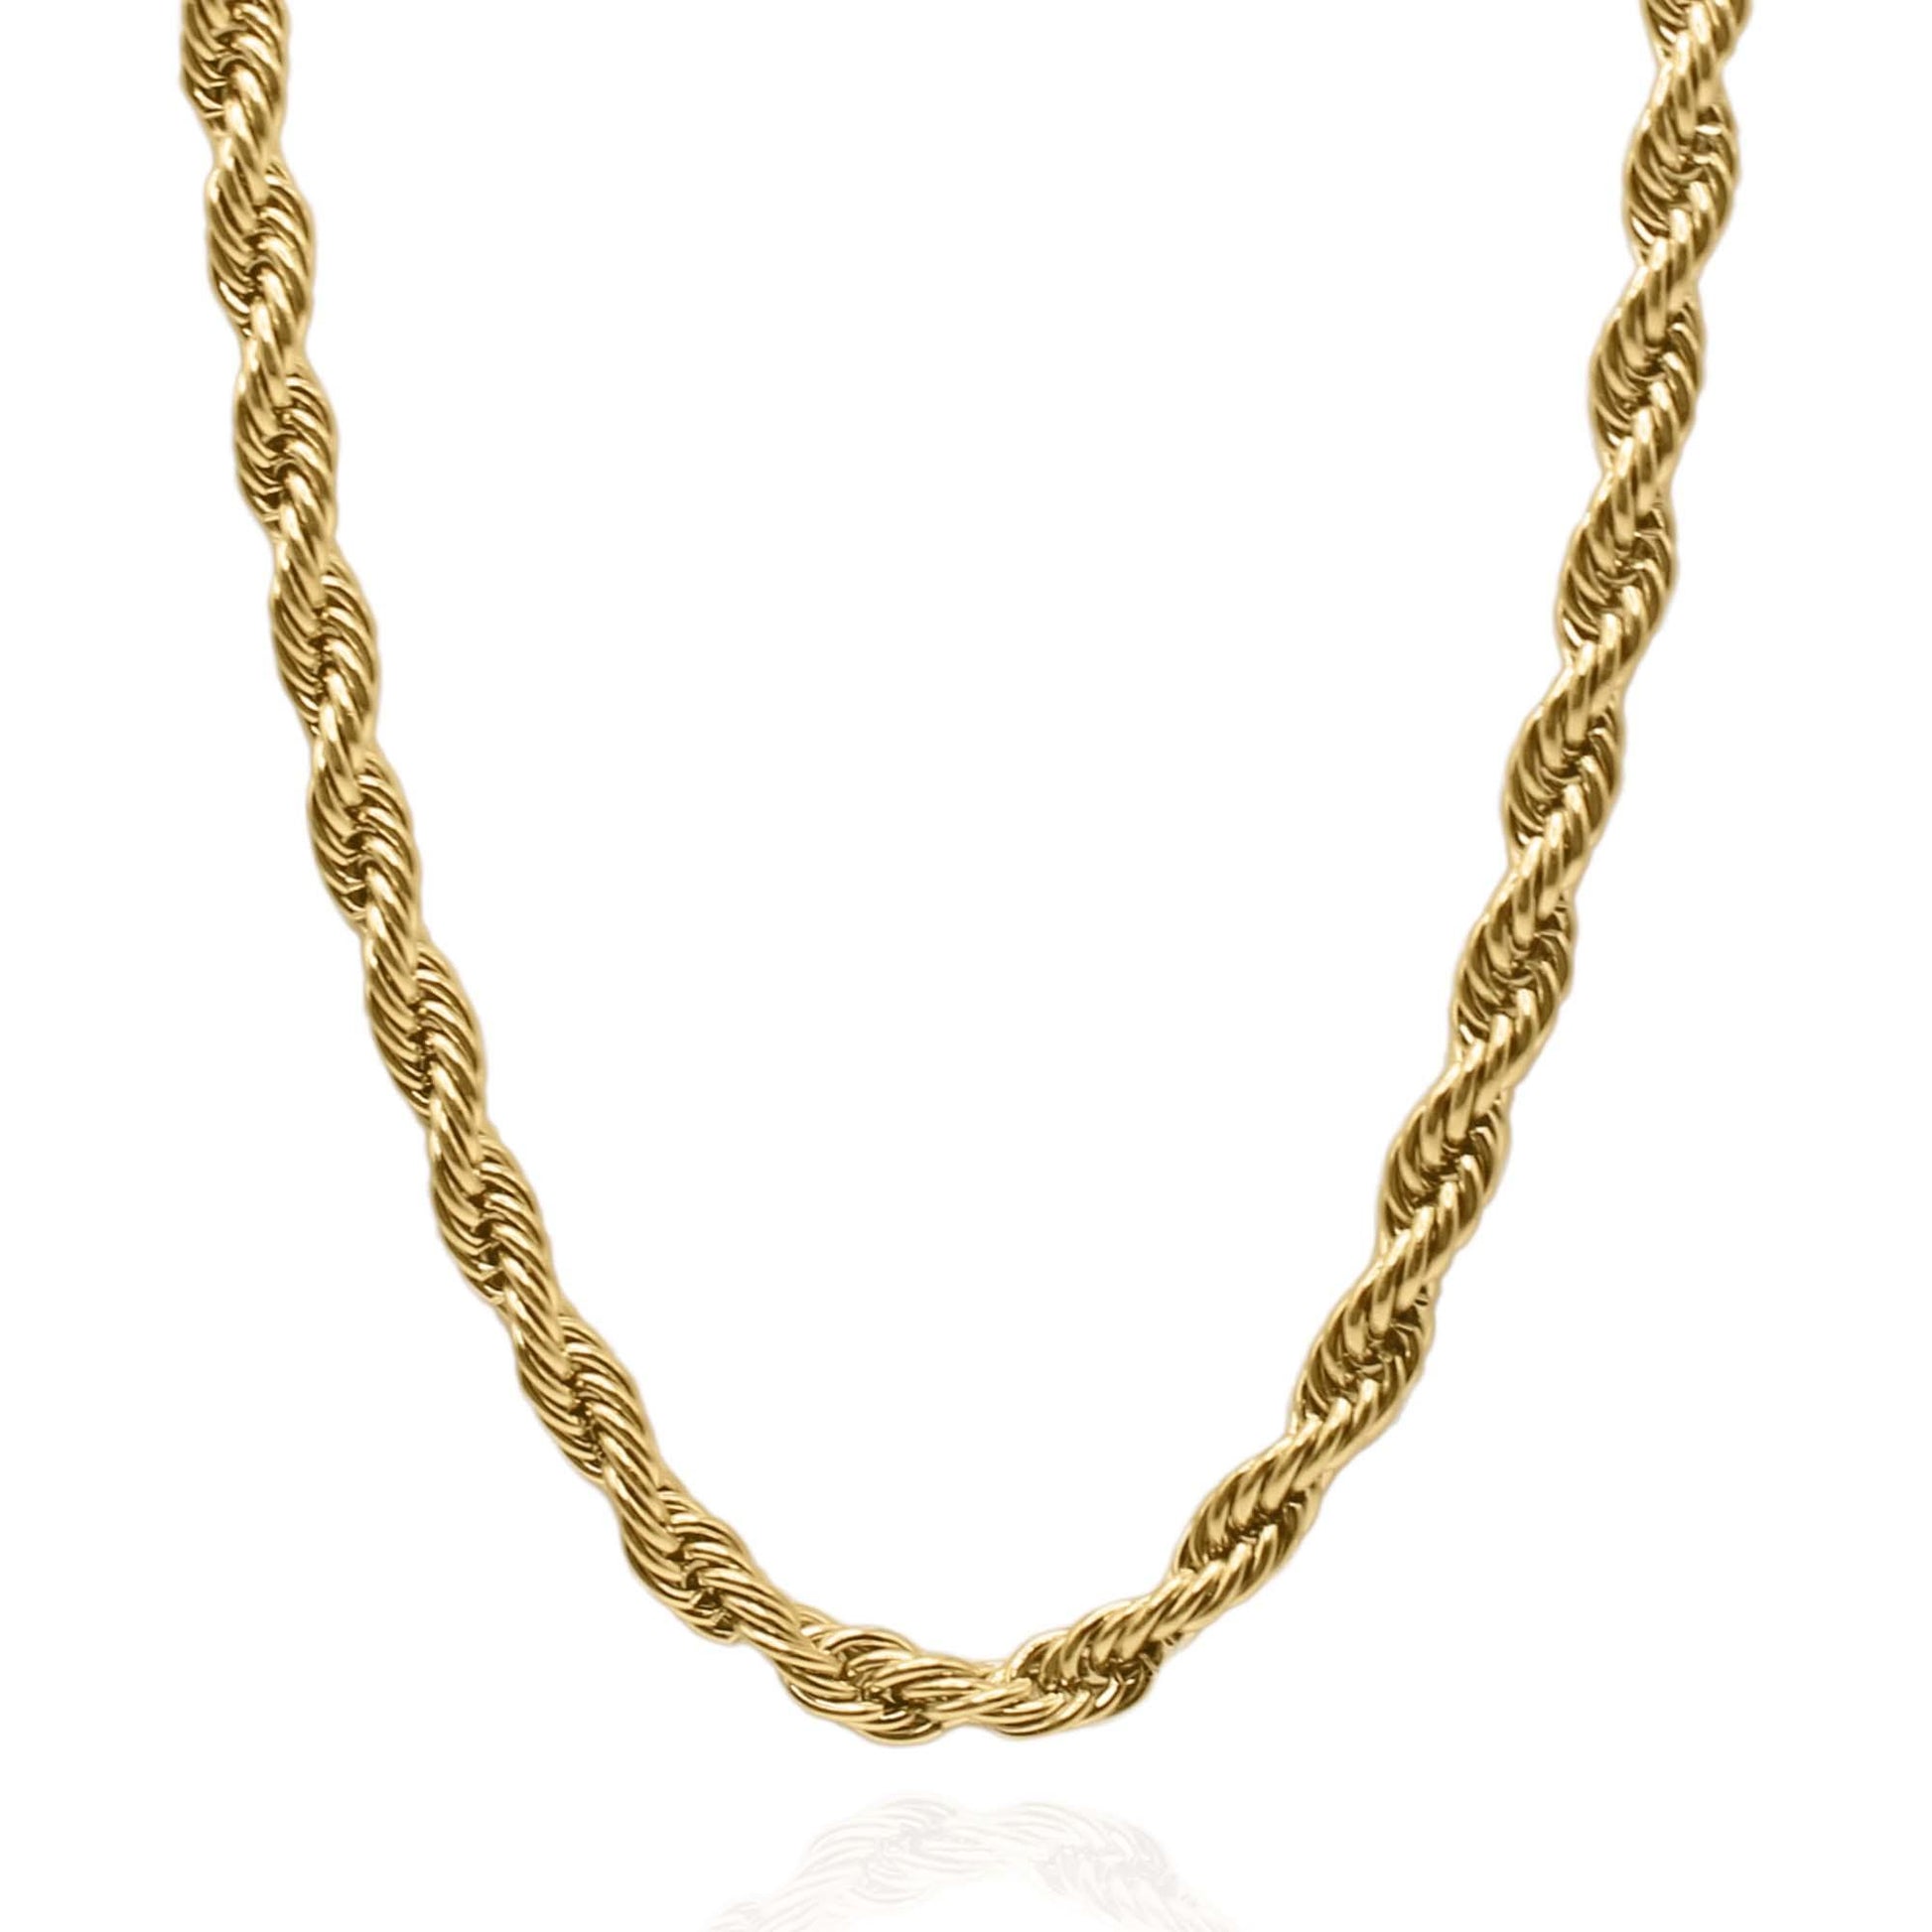 Maia Twist Chain Necklace - Gold - Luna Charles | choker, dawn, everyday, gold, necklace | 